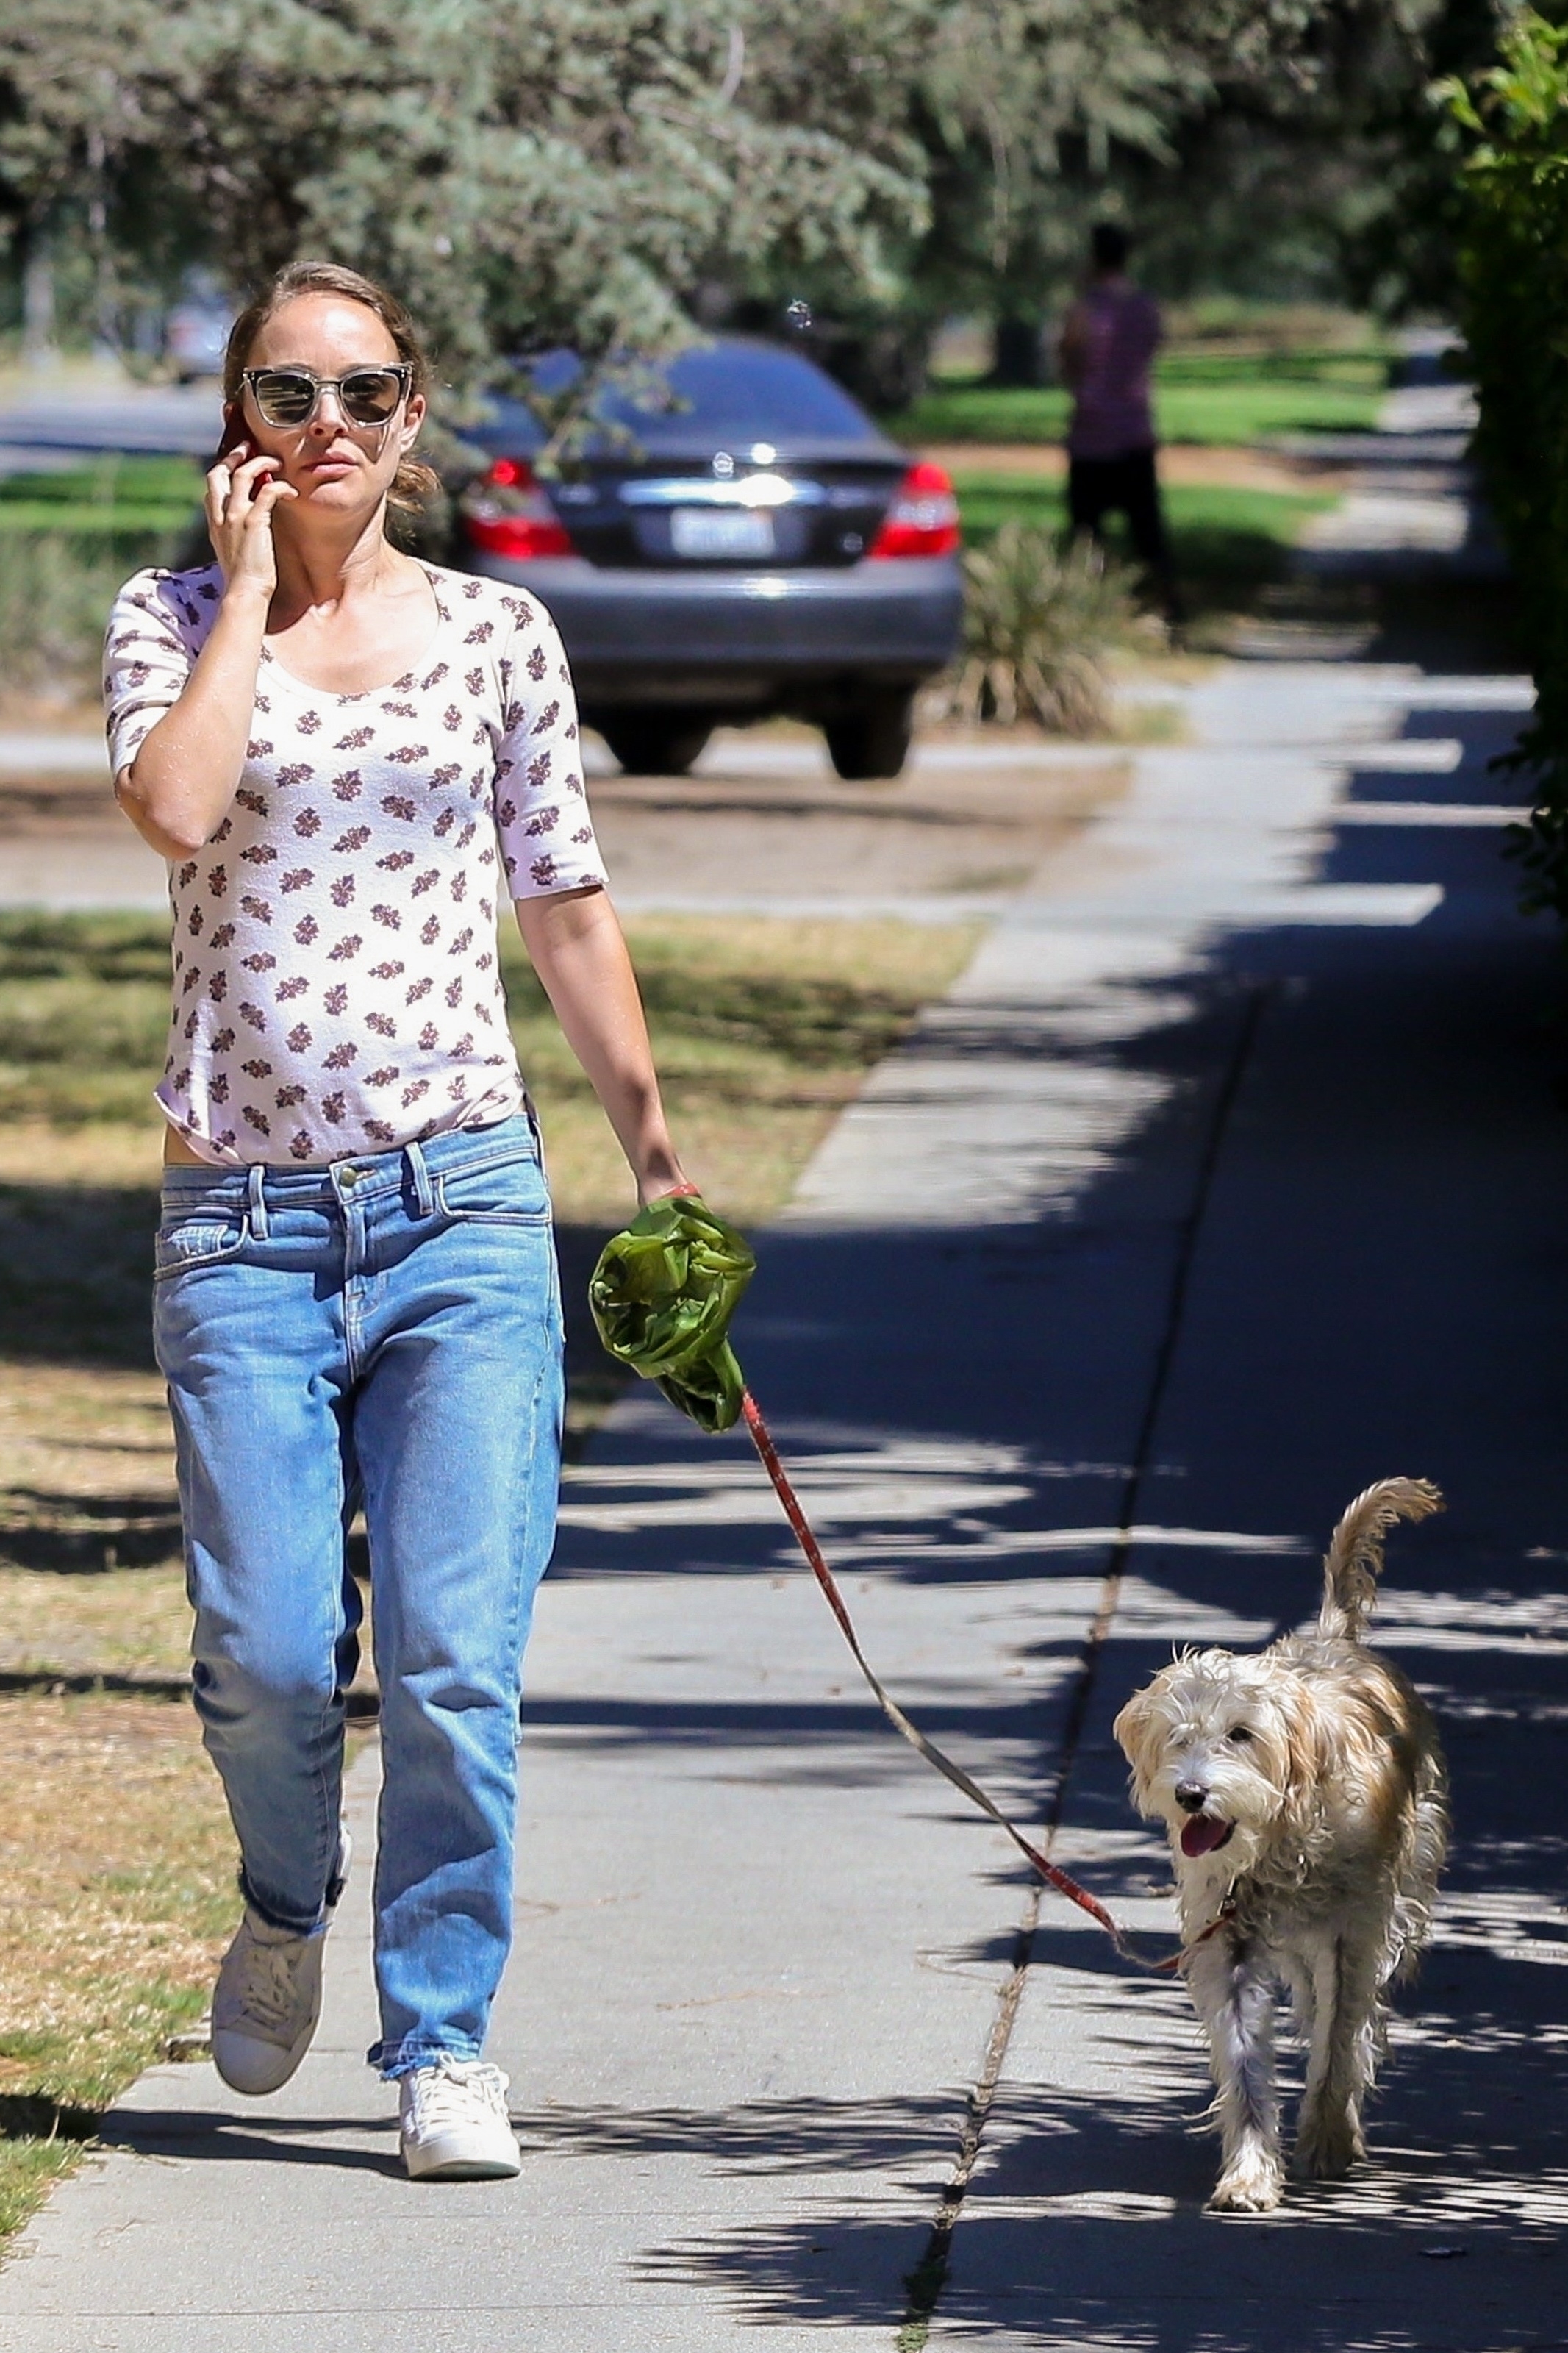 natalie-portman-out-for-a-walk-with-her-dog-near-griffith-park-in-los-feliz-09172018.jpg